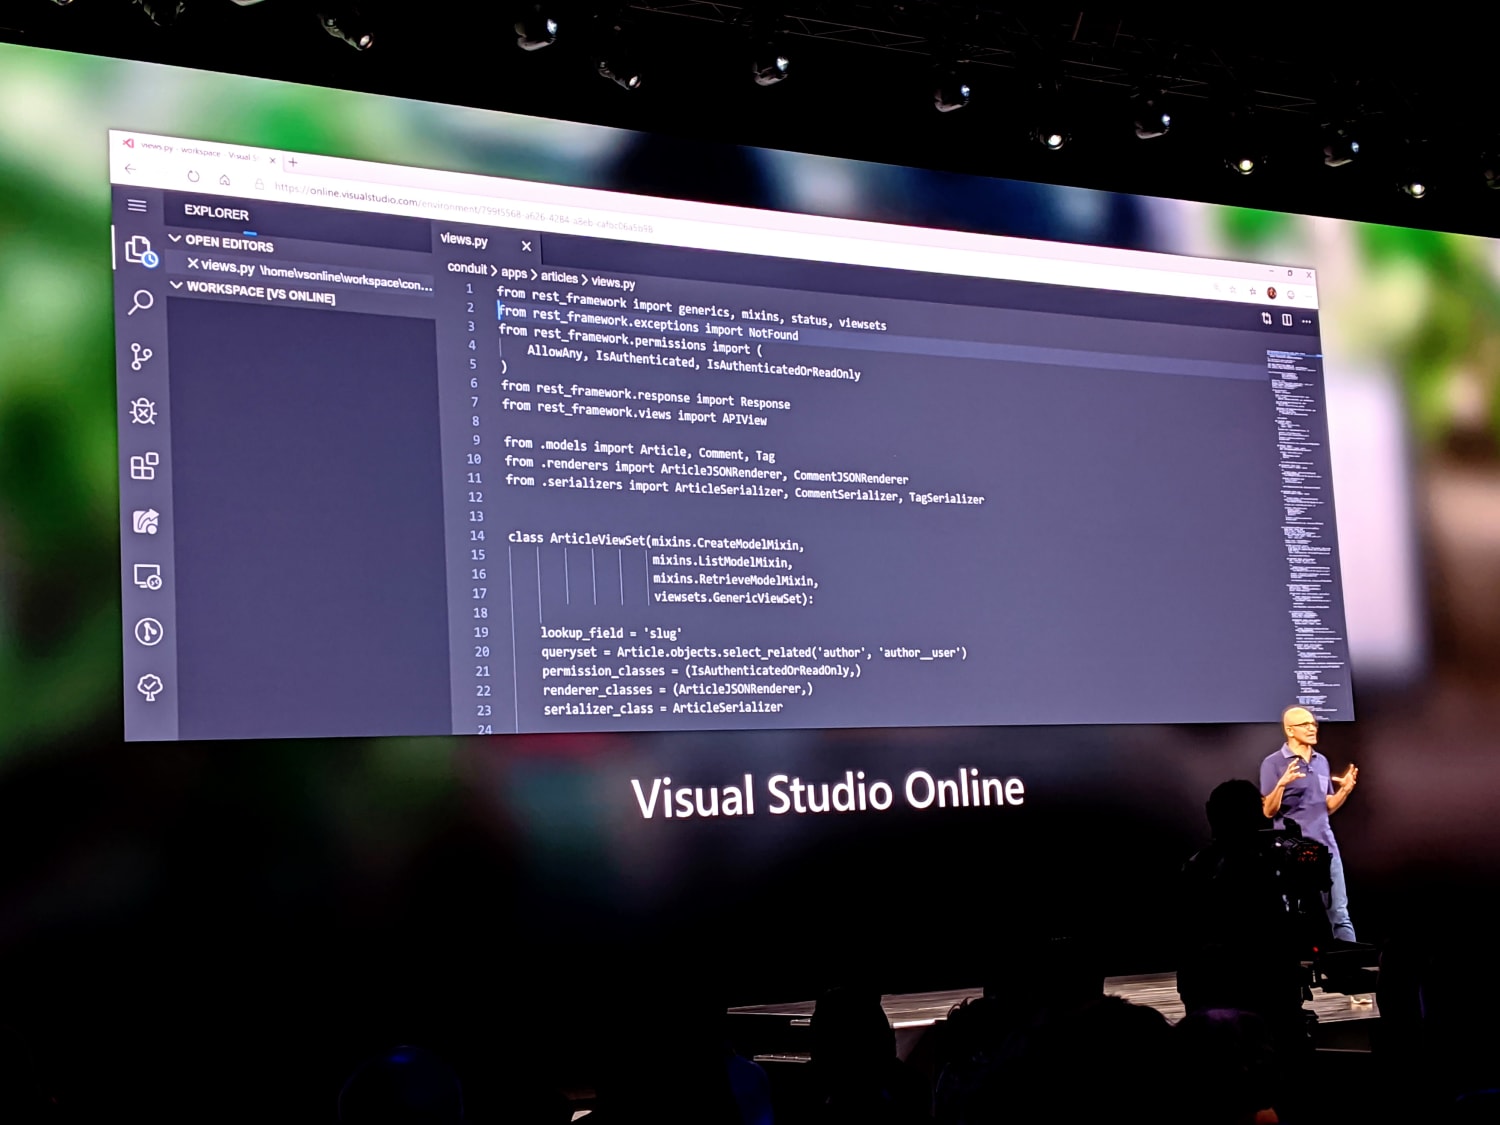 You can now try Microsoft's web-based version of Visual Studio